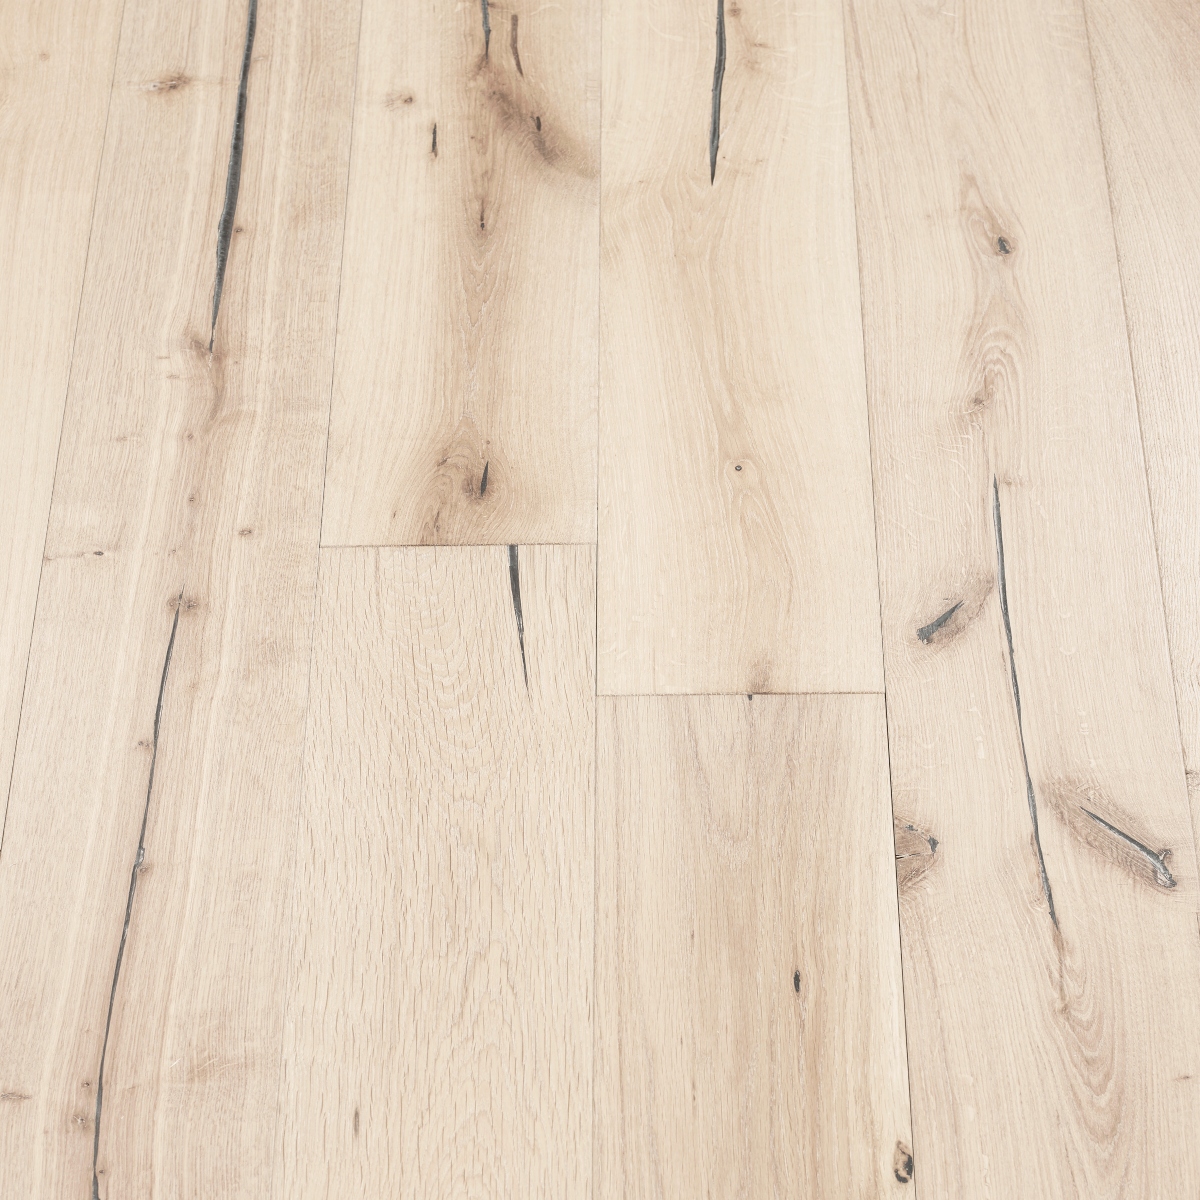 Alpine Distressed Wood Flooring: A photograph displaying distressed alpine wood flooring with whitewashed tones and distressed textures, evoking a sense of rustic elegance.